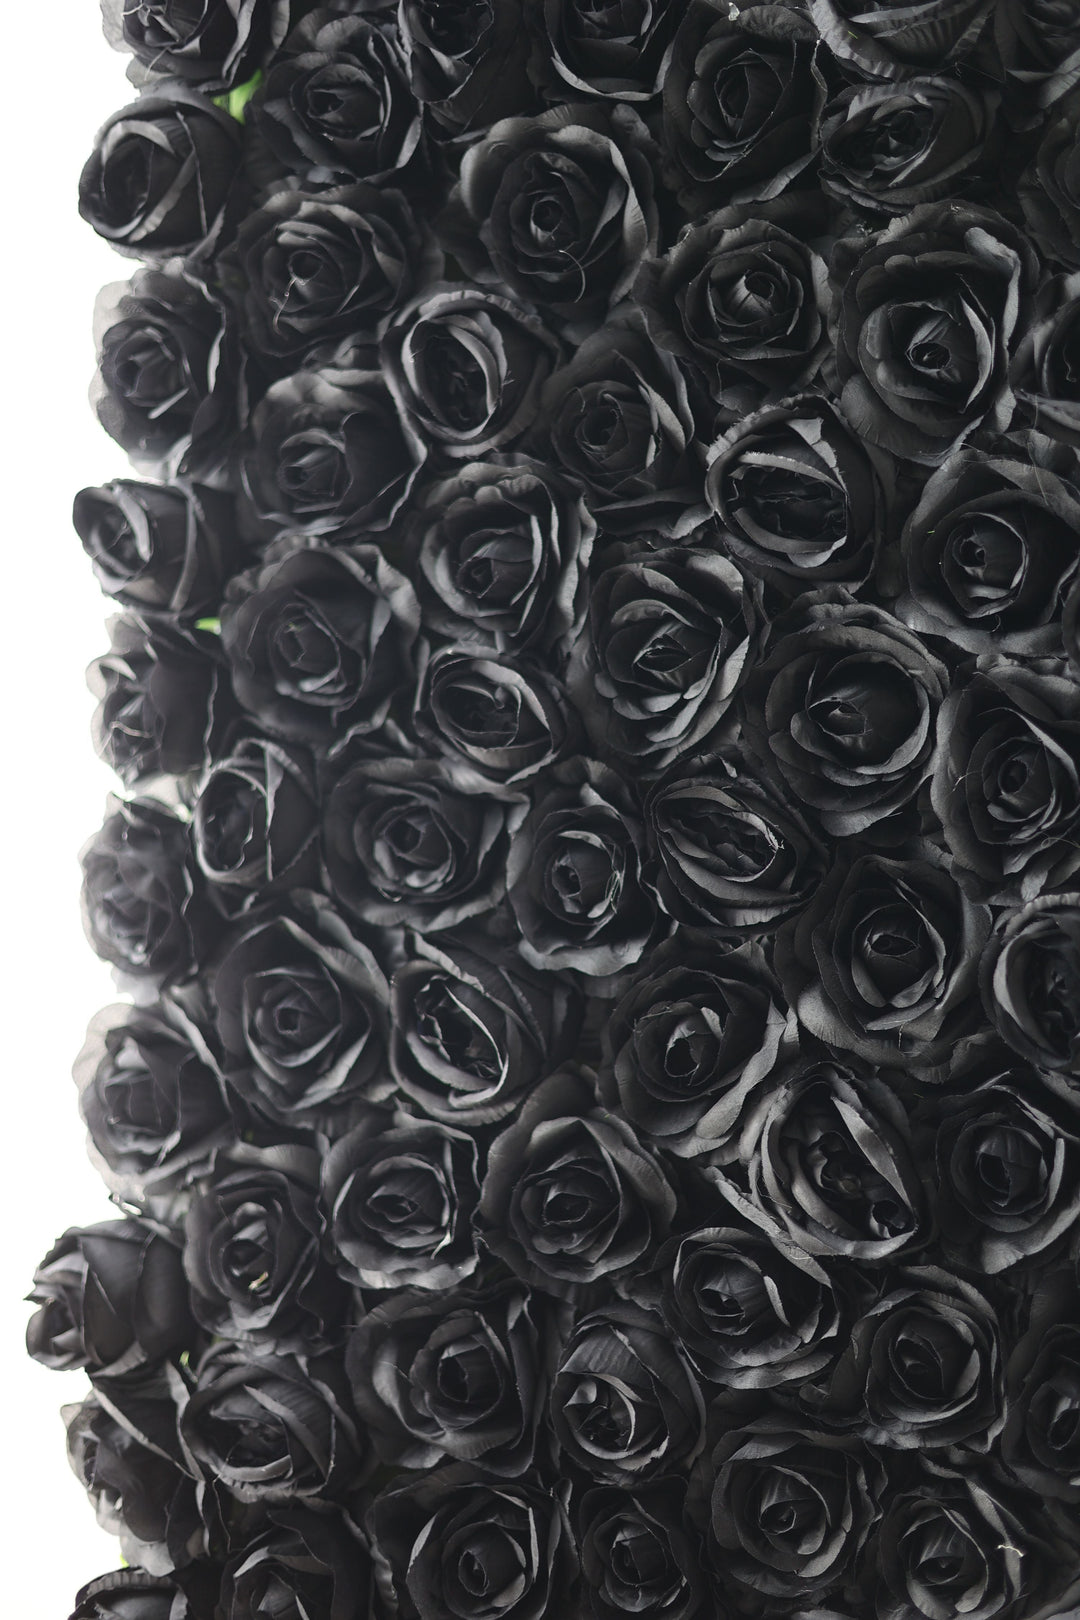 Black Roses, Artificial Flower Wall, Wedding Party Backdrop